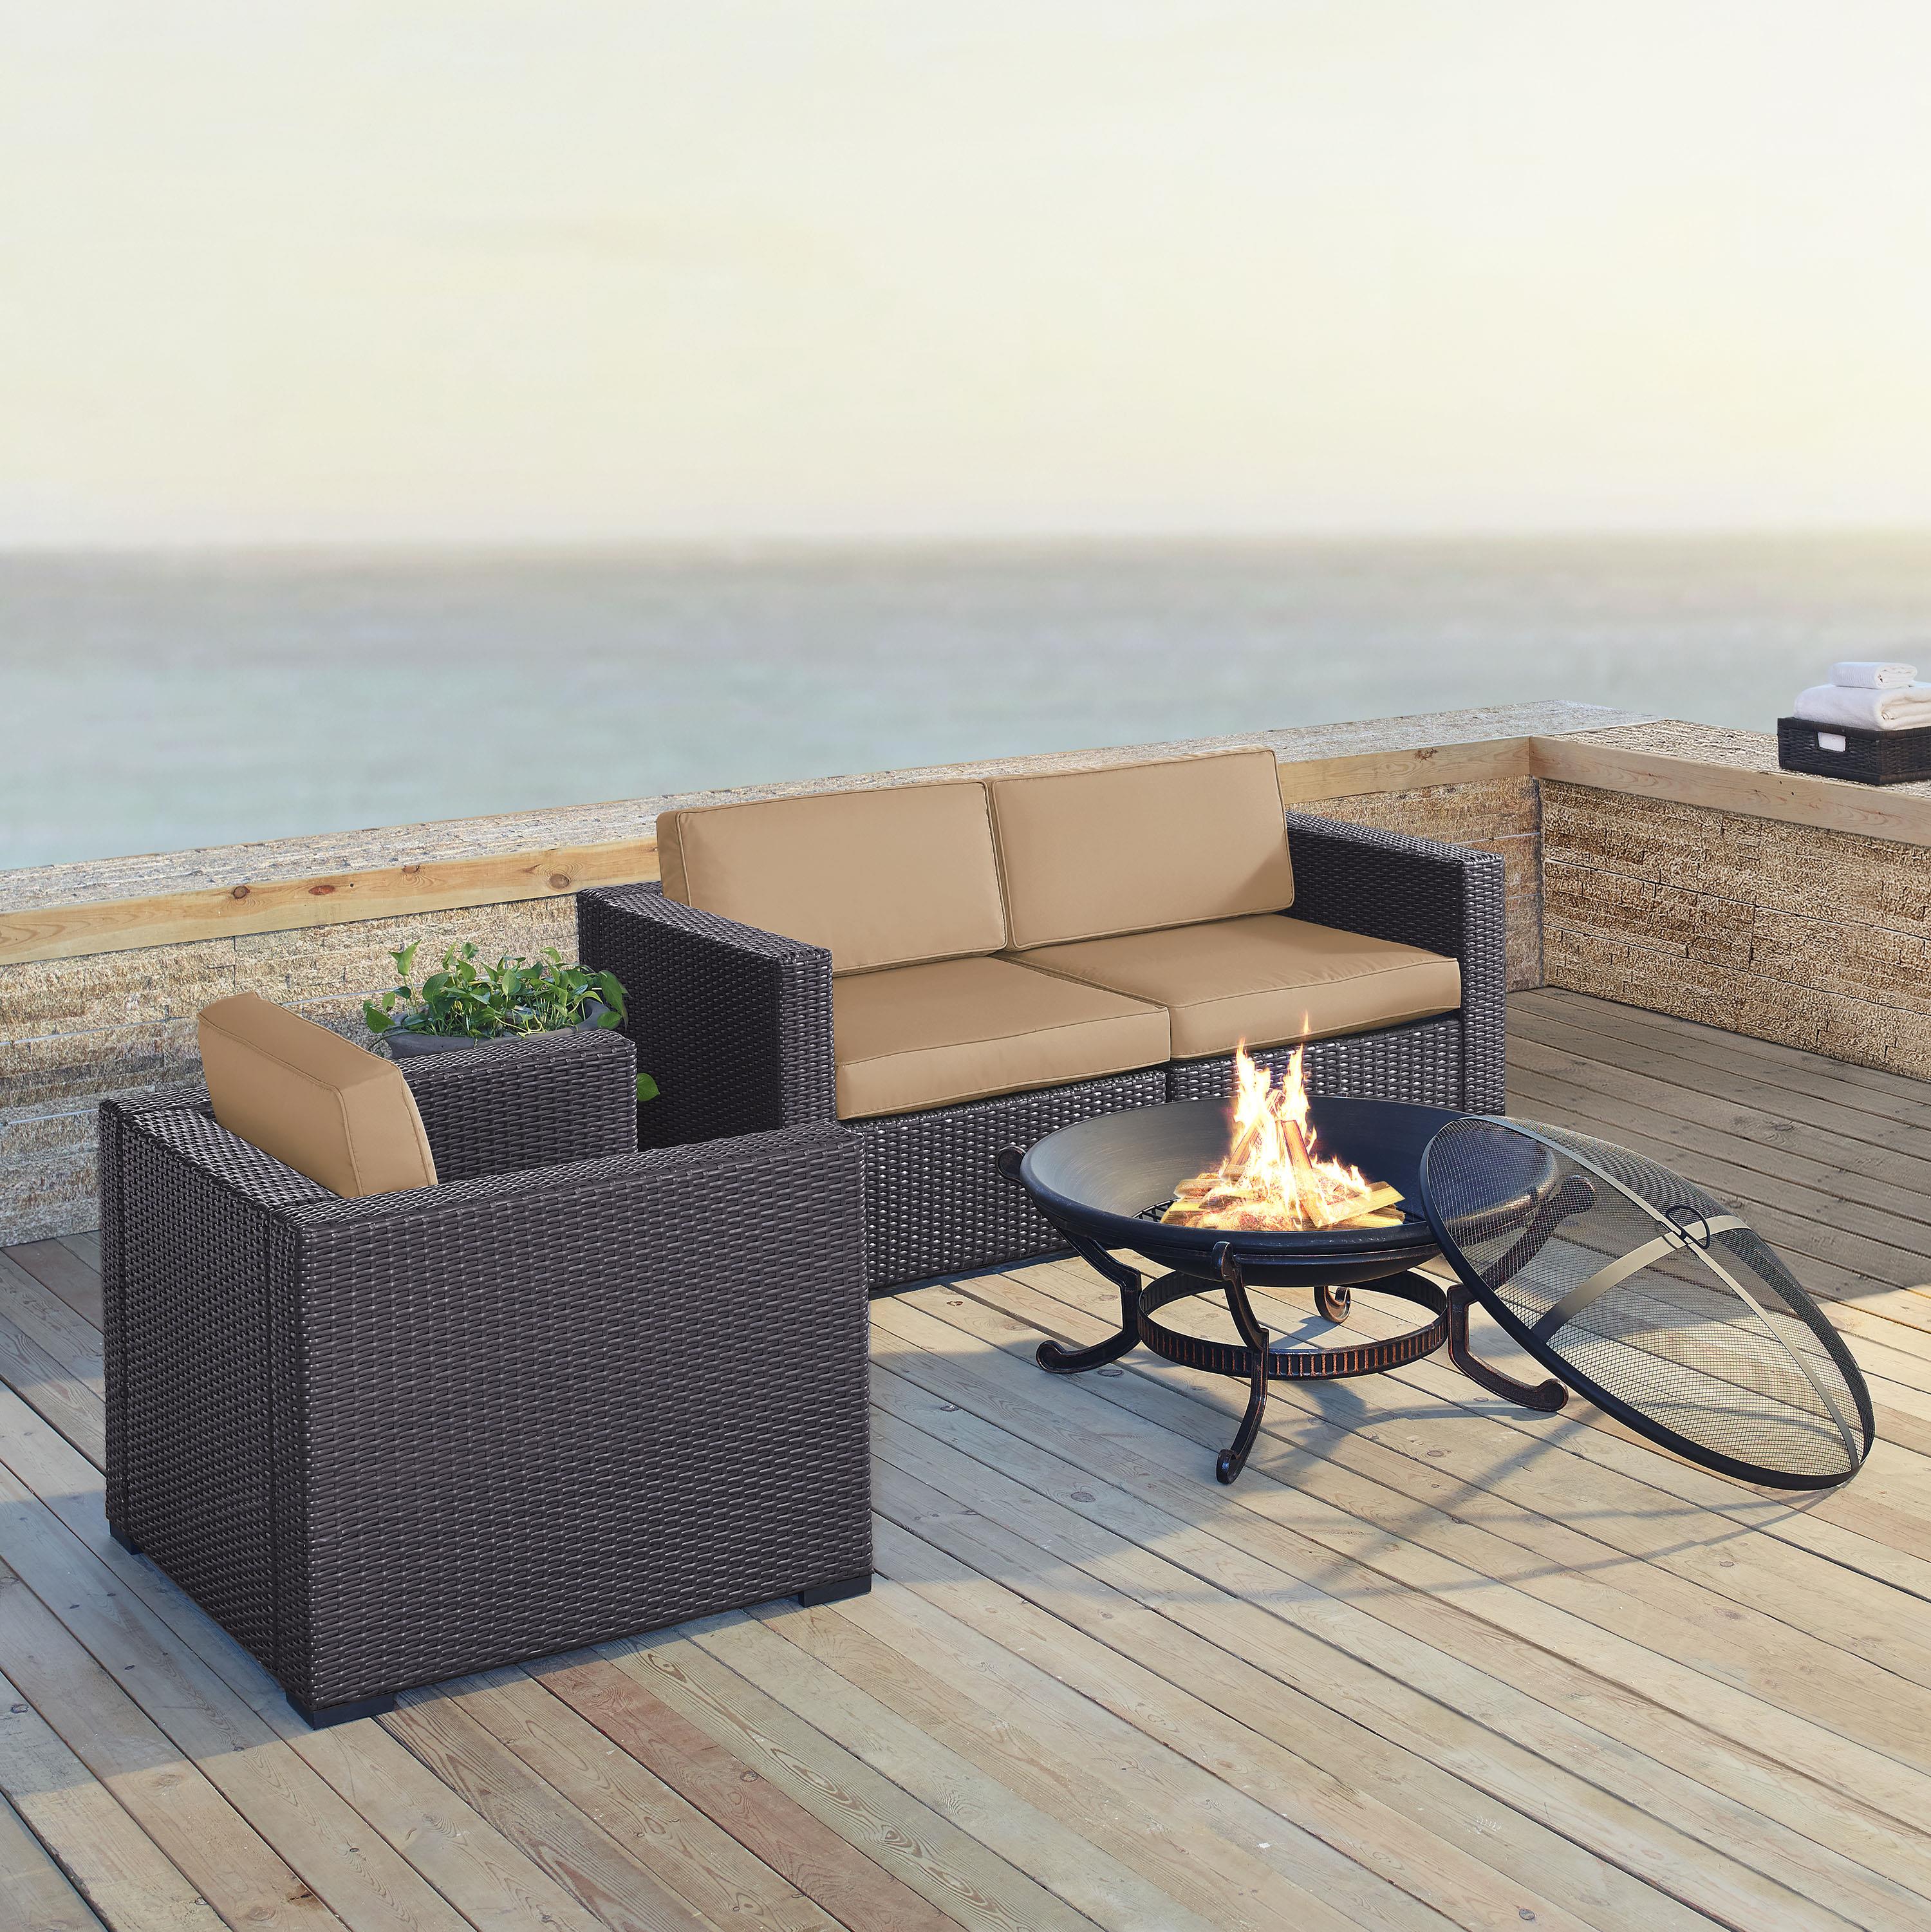 Biscayne 4Pc Outdoor Wicker Conversation Set W/Fire Pit Mocha/Brown - Armchair, Ashland Firepit, & 2 Corner Chairs - image 4 of 4